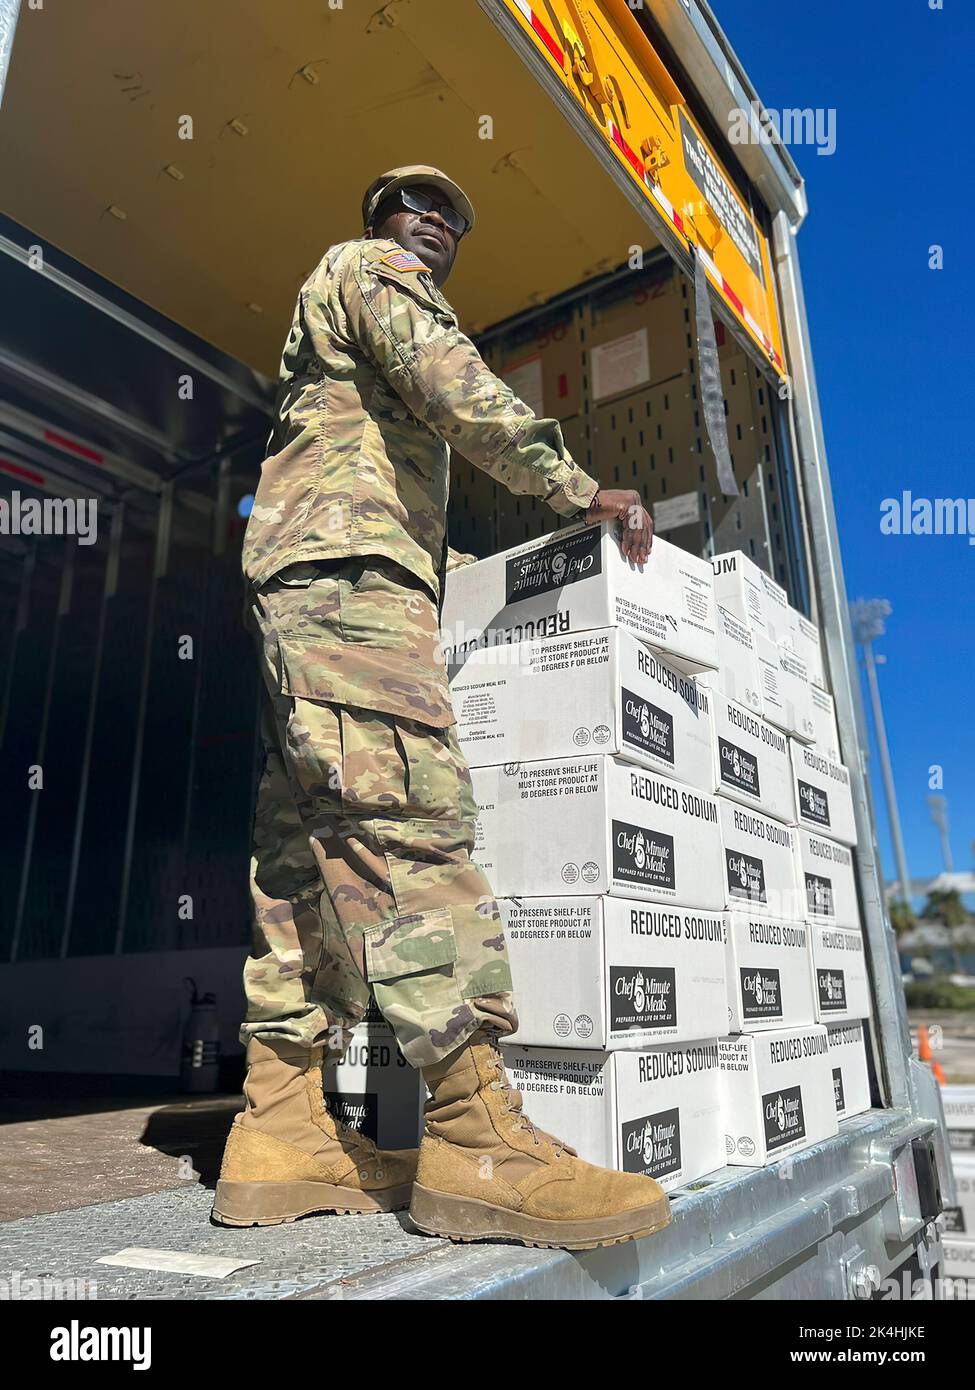 Sgt. Jesmond Russ, a mechanic with the 144th Transportation Company prepares to hand out food to civilians affected by Hurricane Ian September 30, 2022 Port Charlotte, Fla. The Florida National Guard has been assisting state and local authorities in the aftermath of Hurricane Ian. Stock Photo